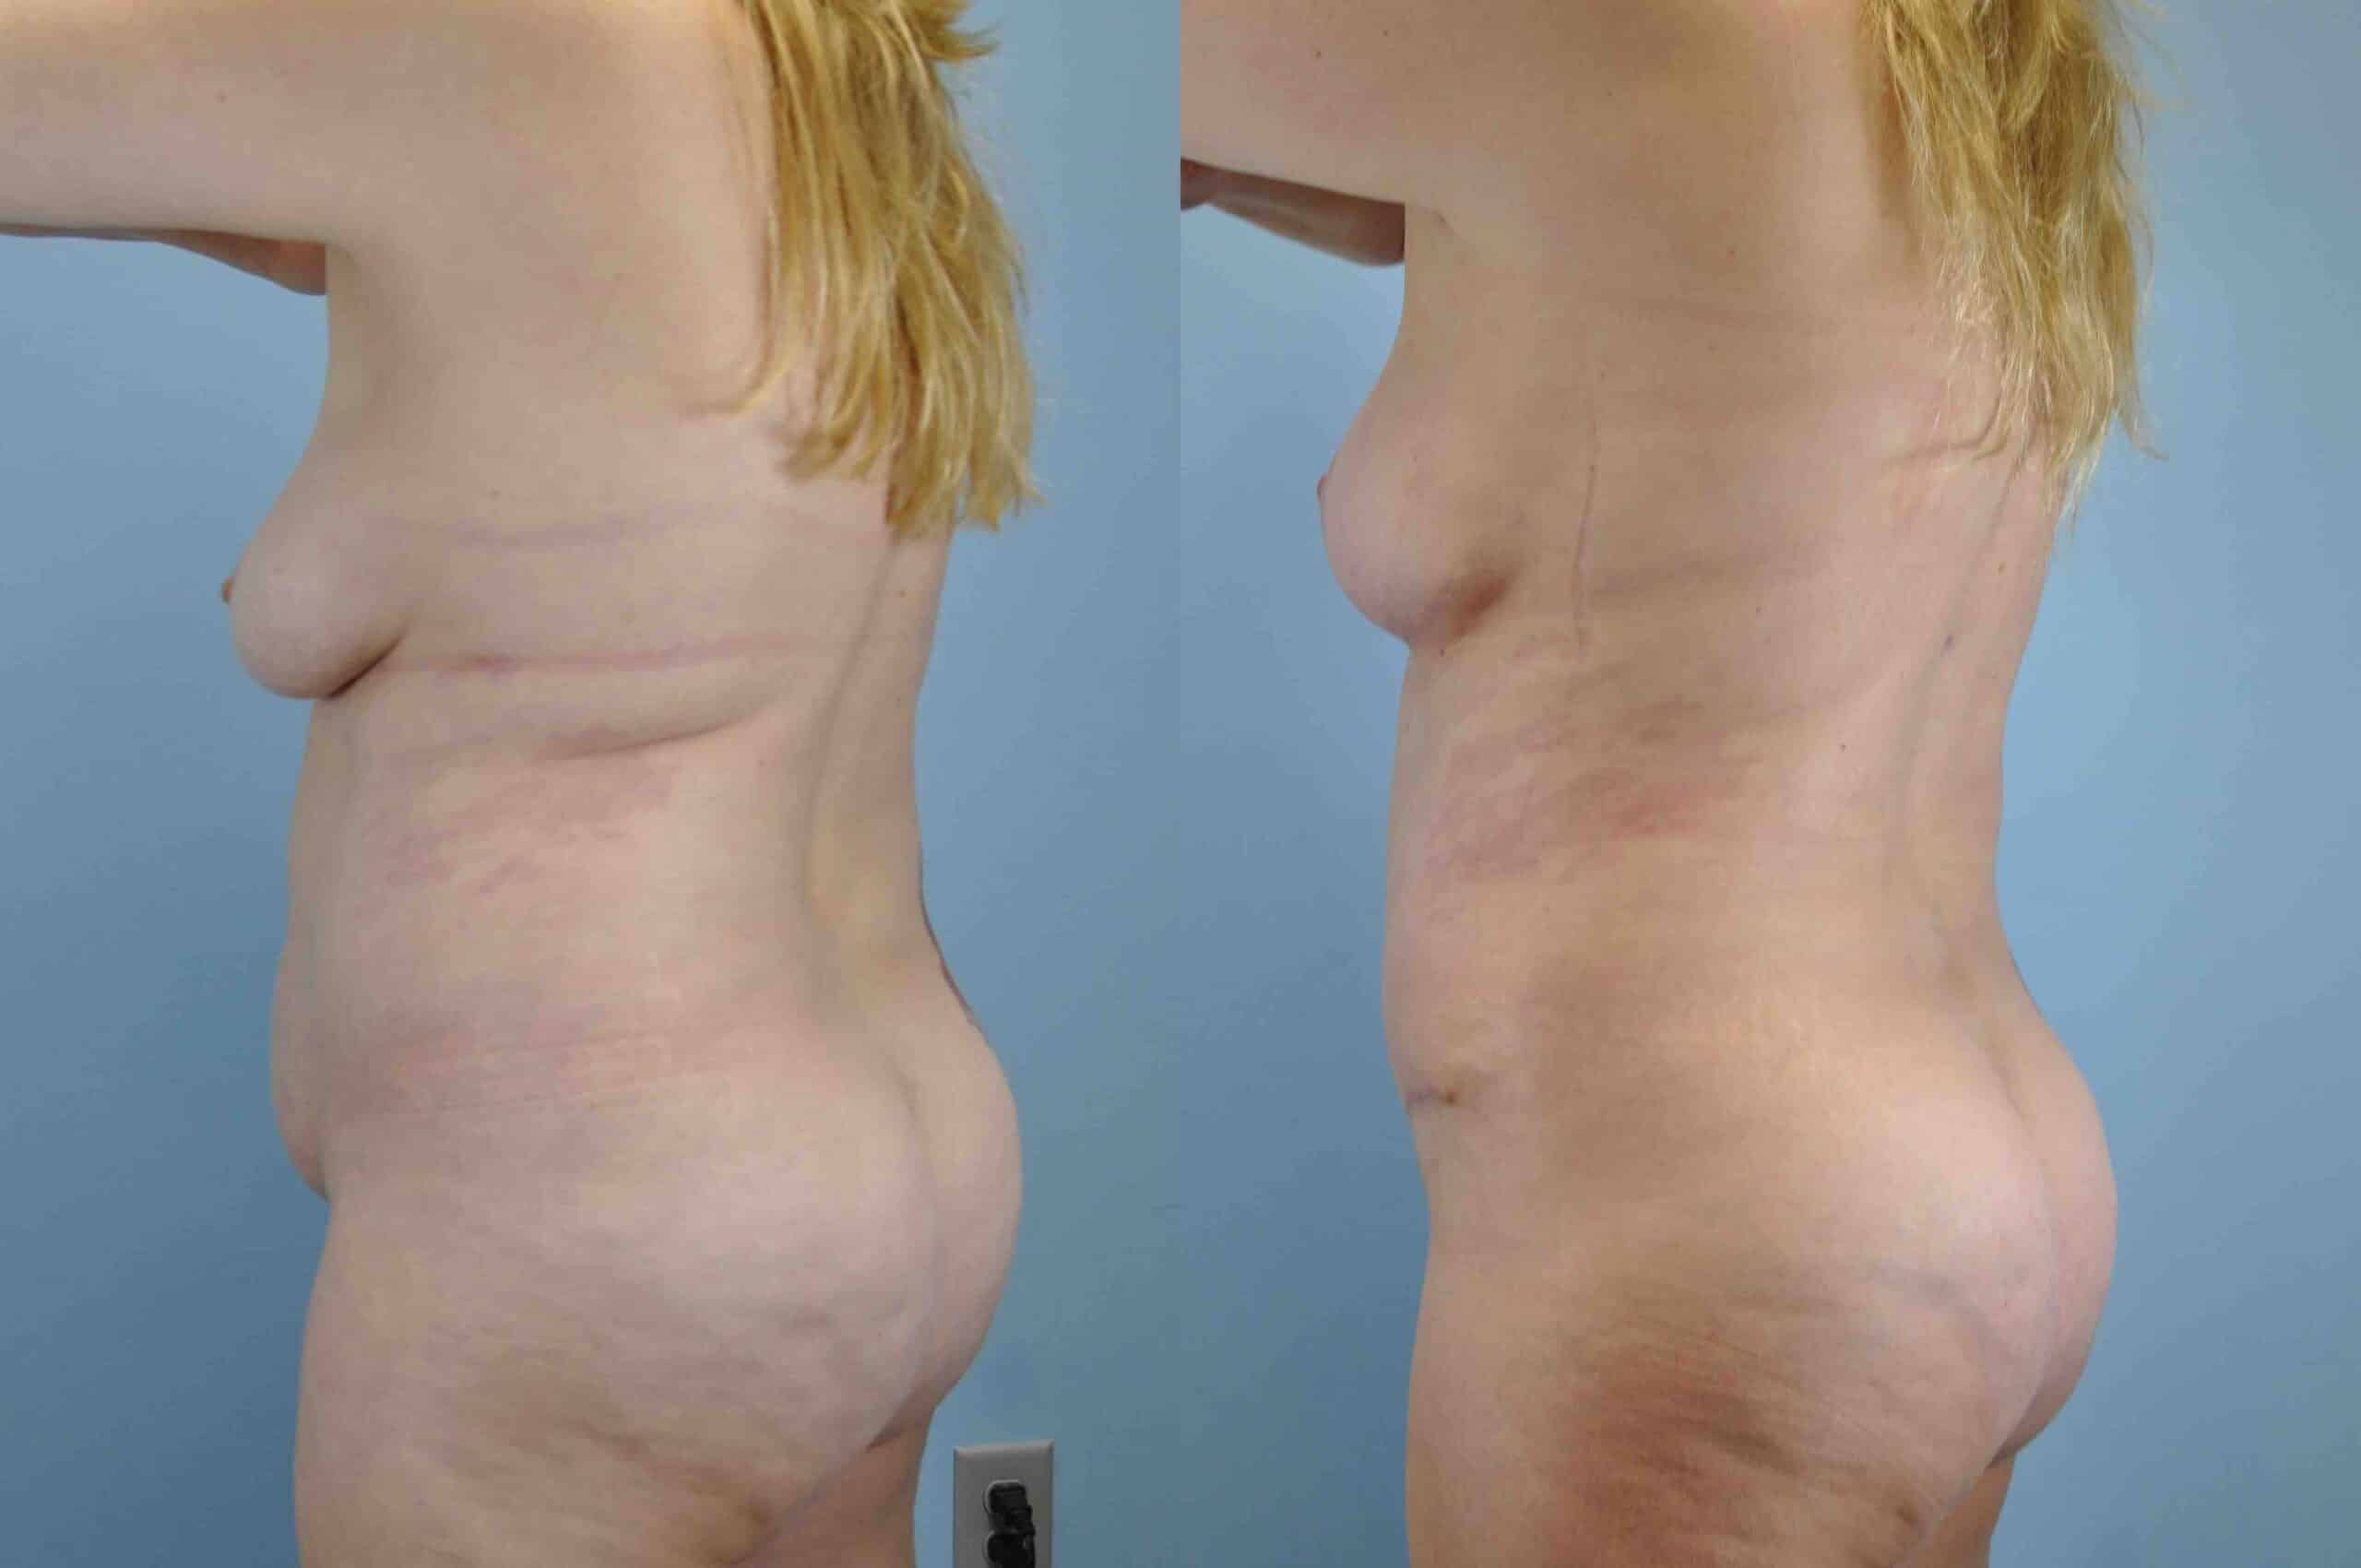 Before and after, 1 yr post op from Tummy Tuck, Breast Lift/Mastopexy, VASER Abdomen Flanks & Back performed by Dr. Paul Vanek (diagonal/rear view)